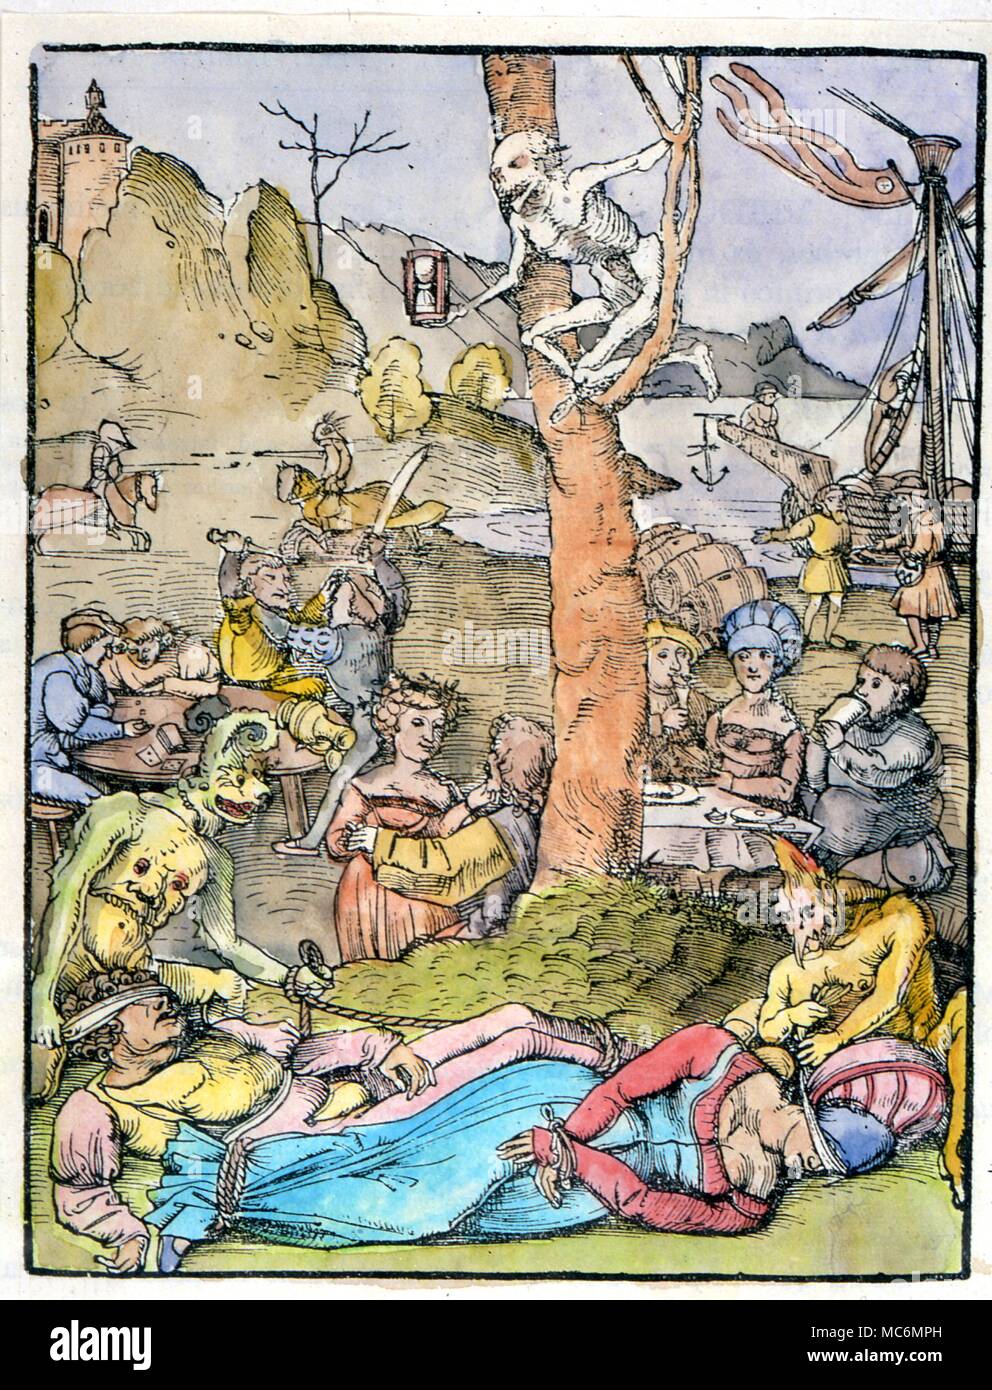 Medical. Woodcut illustration from Ibn Botlan who was a Christian physician (d.1063), working in Baghdad. This print is from his Schchtafelen der Gesuntheyt, Strasbourg 1533. Stock Photo